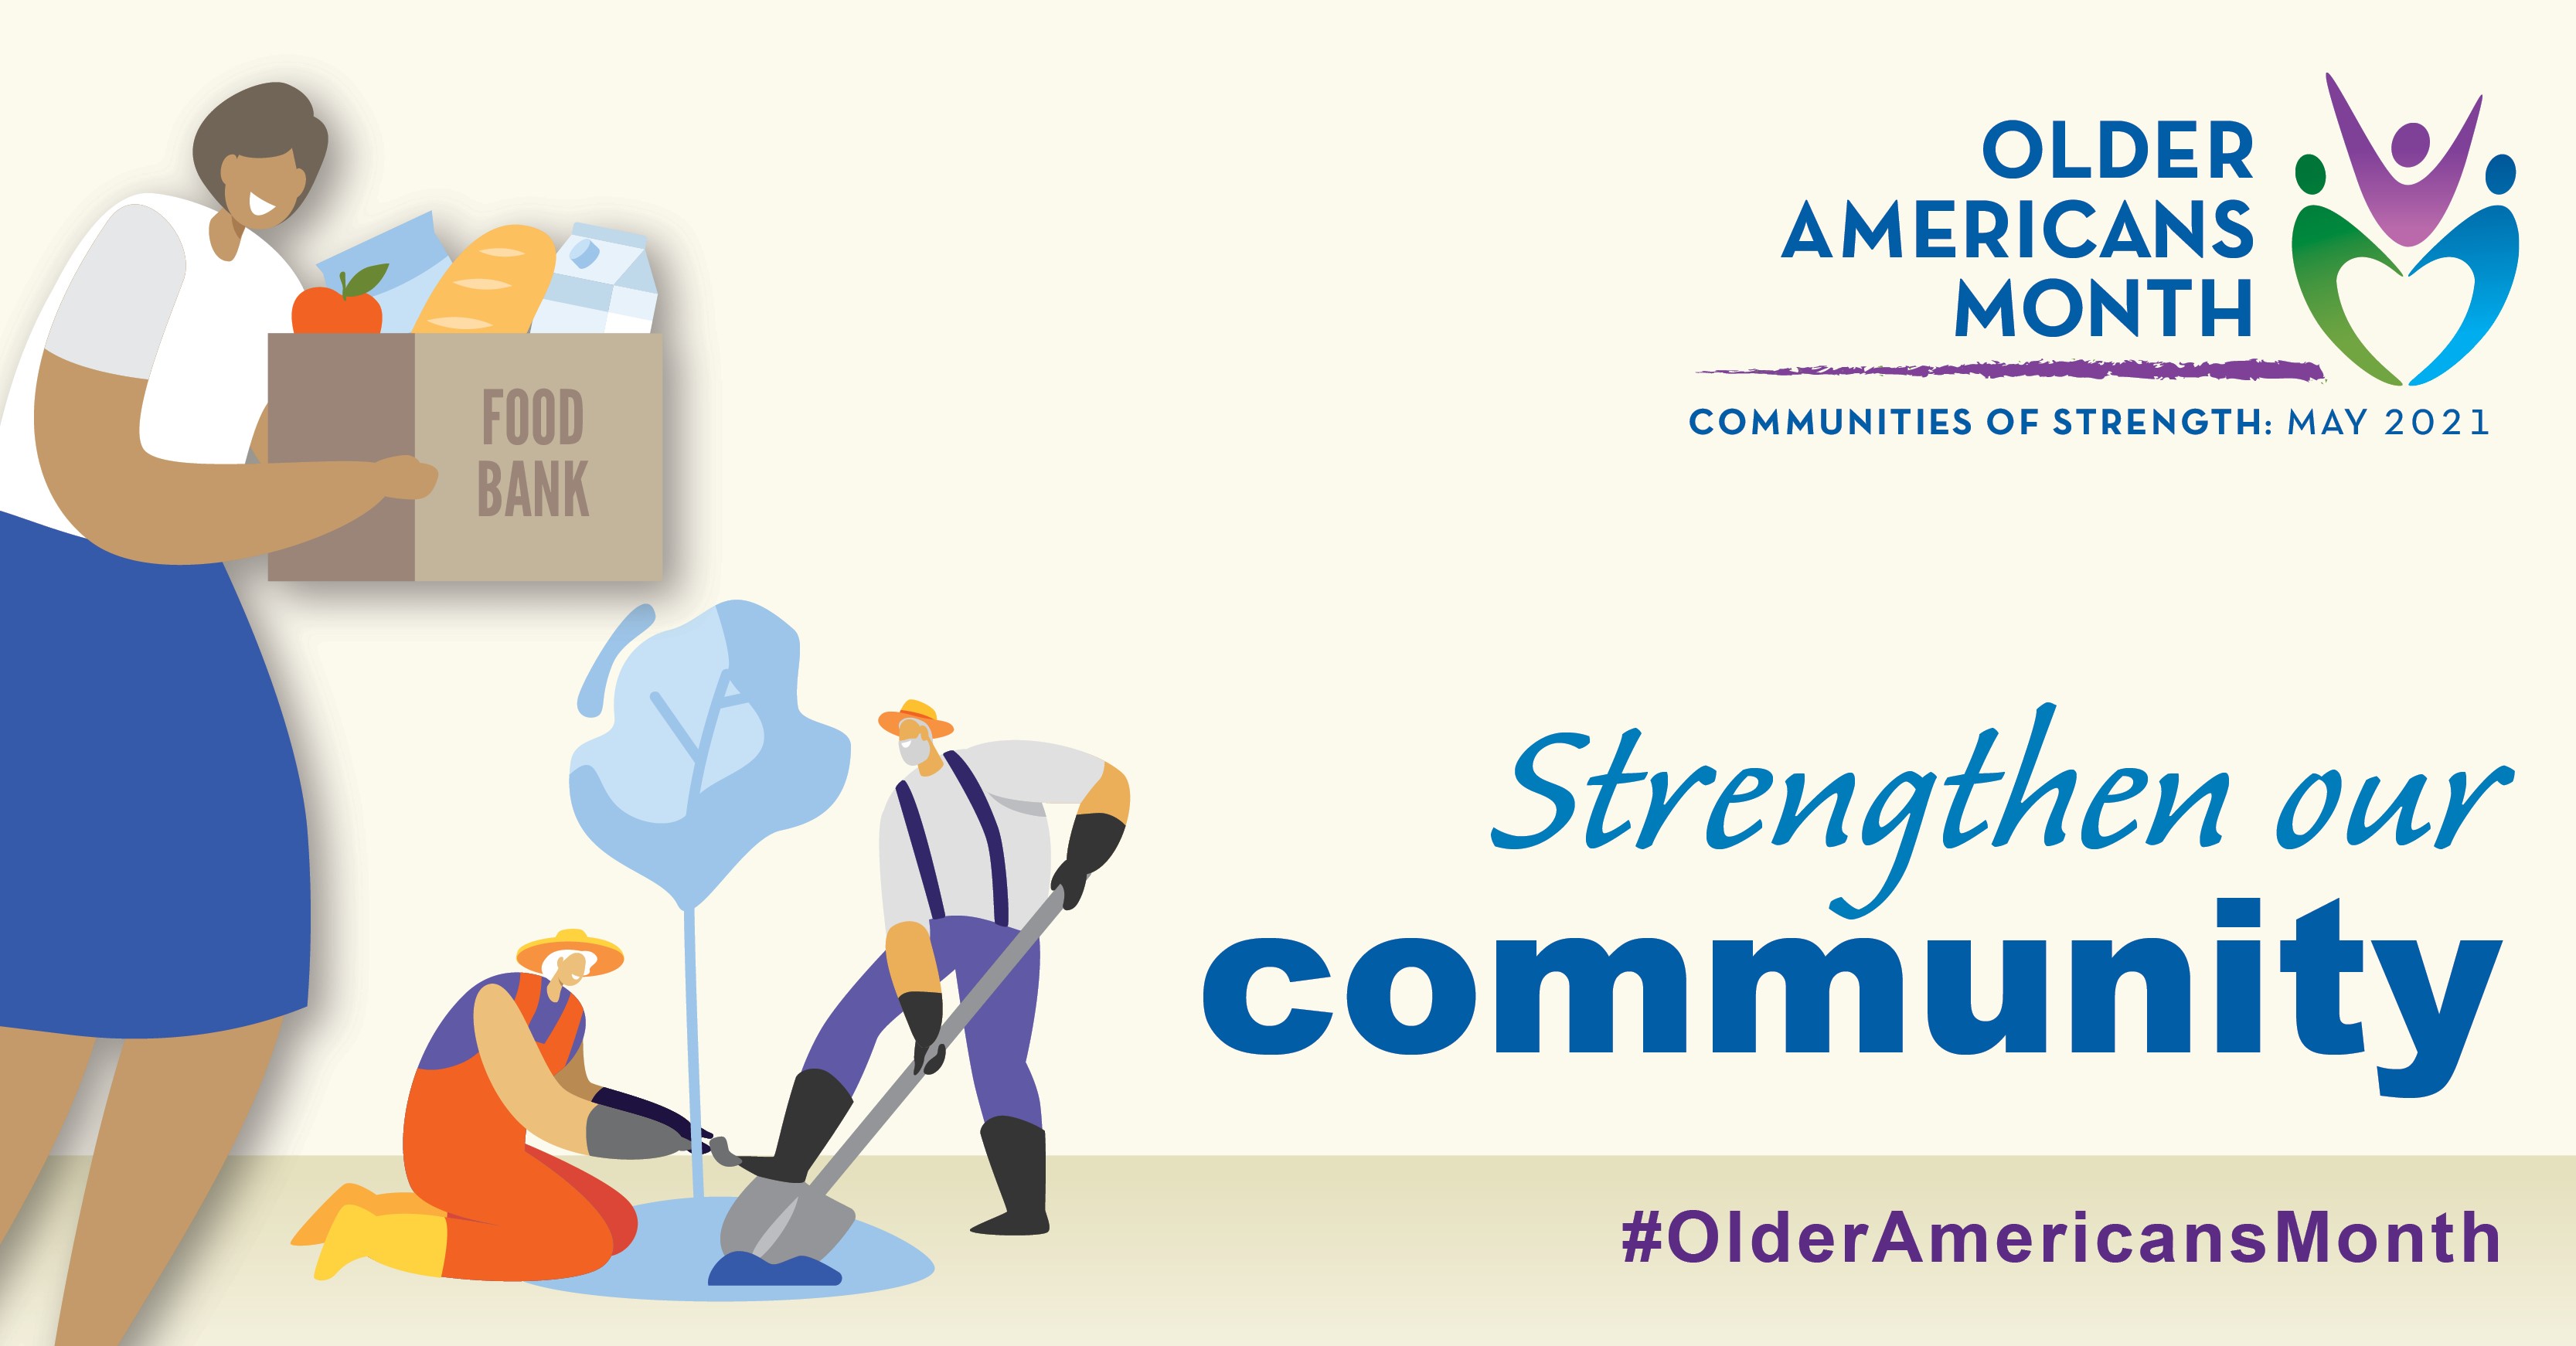 Social Media Graphic: Communities of Strength, Older Americans Month, May 2021. Strengthen Our Community. #OlderAmericansMonth